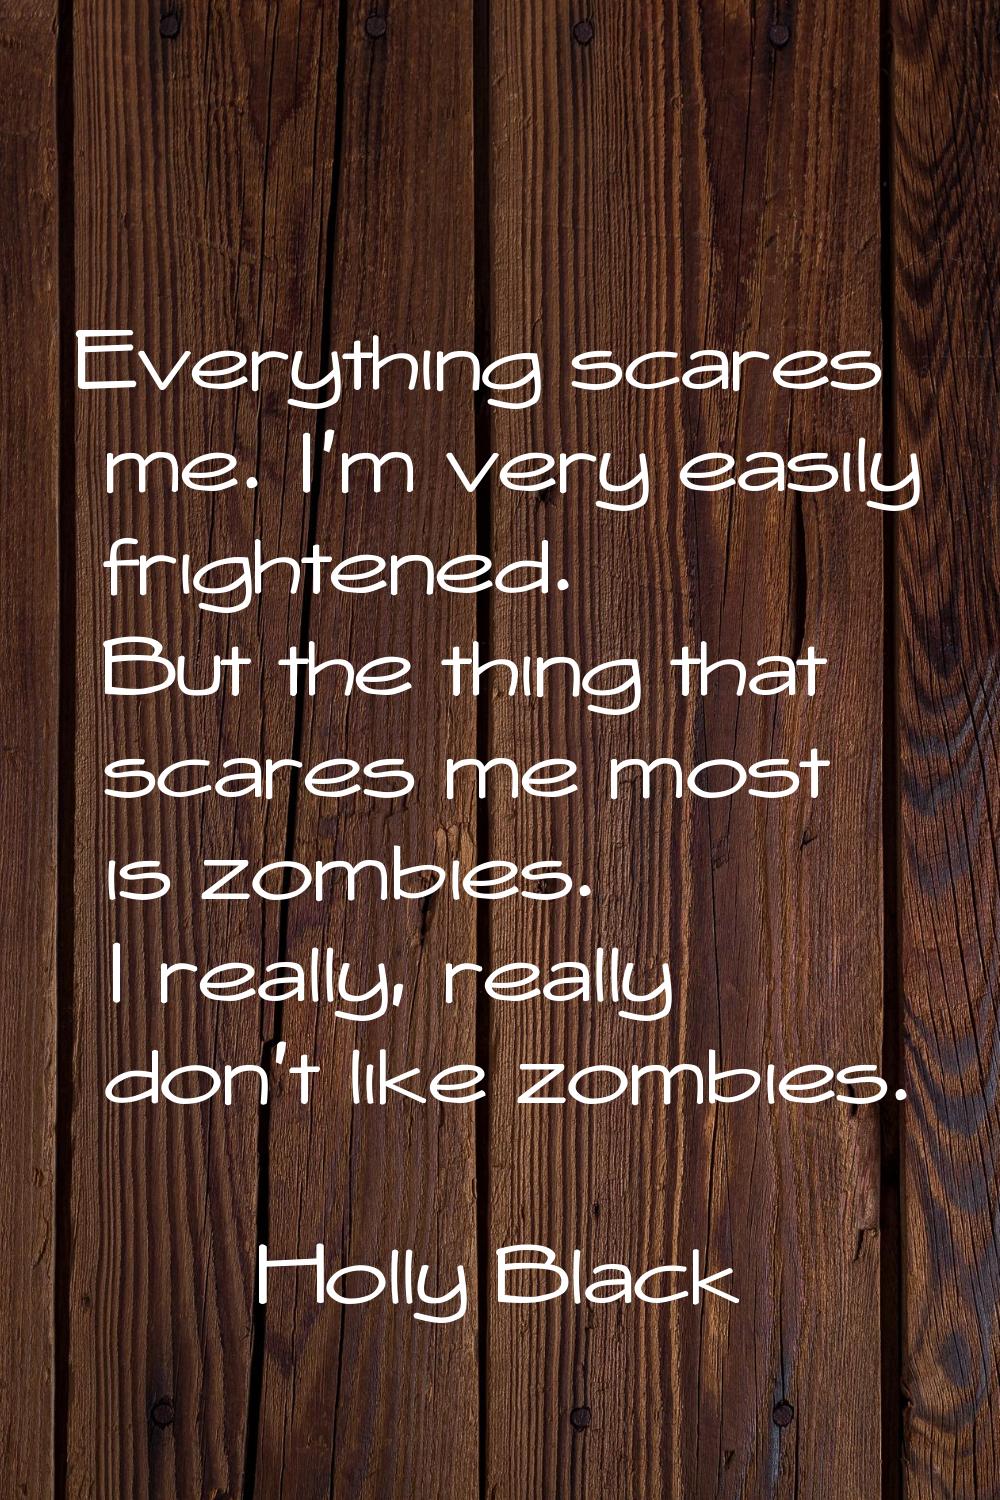 Everything scares me. I'm very easily frightened. But the thing that scares me most is zombies. I r